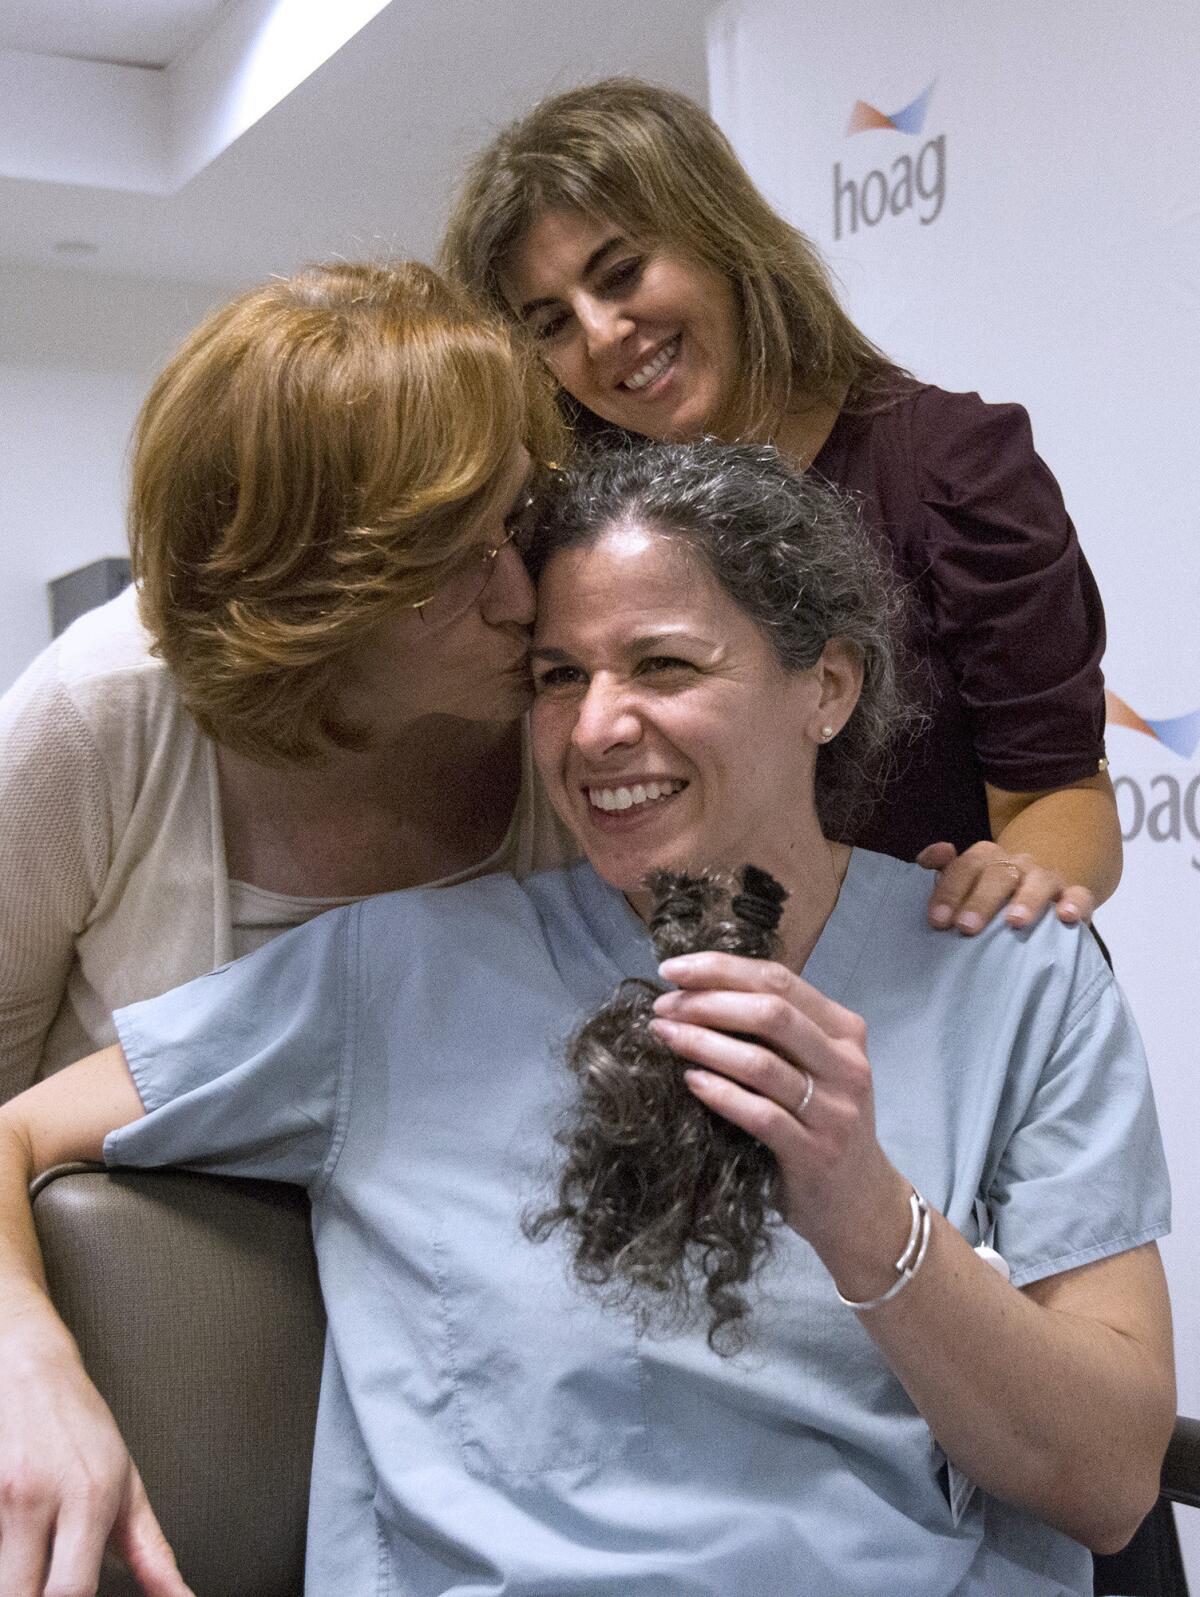 Dr. Lisa Guerra, bottom, a Hoag Breast Center surgeon, holds up 8 inches of her hair that top donors Margie Gollihugh, left, and Niloofar Fakhimi, top, help cut off on Friday at Hoag Cancer Center in Newport Beach. Dr. Guerra raised more than $15,000 for the Susan G. Komen organization's efforts against breast cancer. She pledged at this year's Komen Race for the Cure that the top donor could cut off her ponytail, which she would donate to Pantene Beautiful Lengths, who makes wigs for women with cancer.